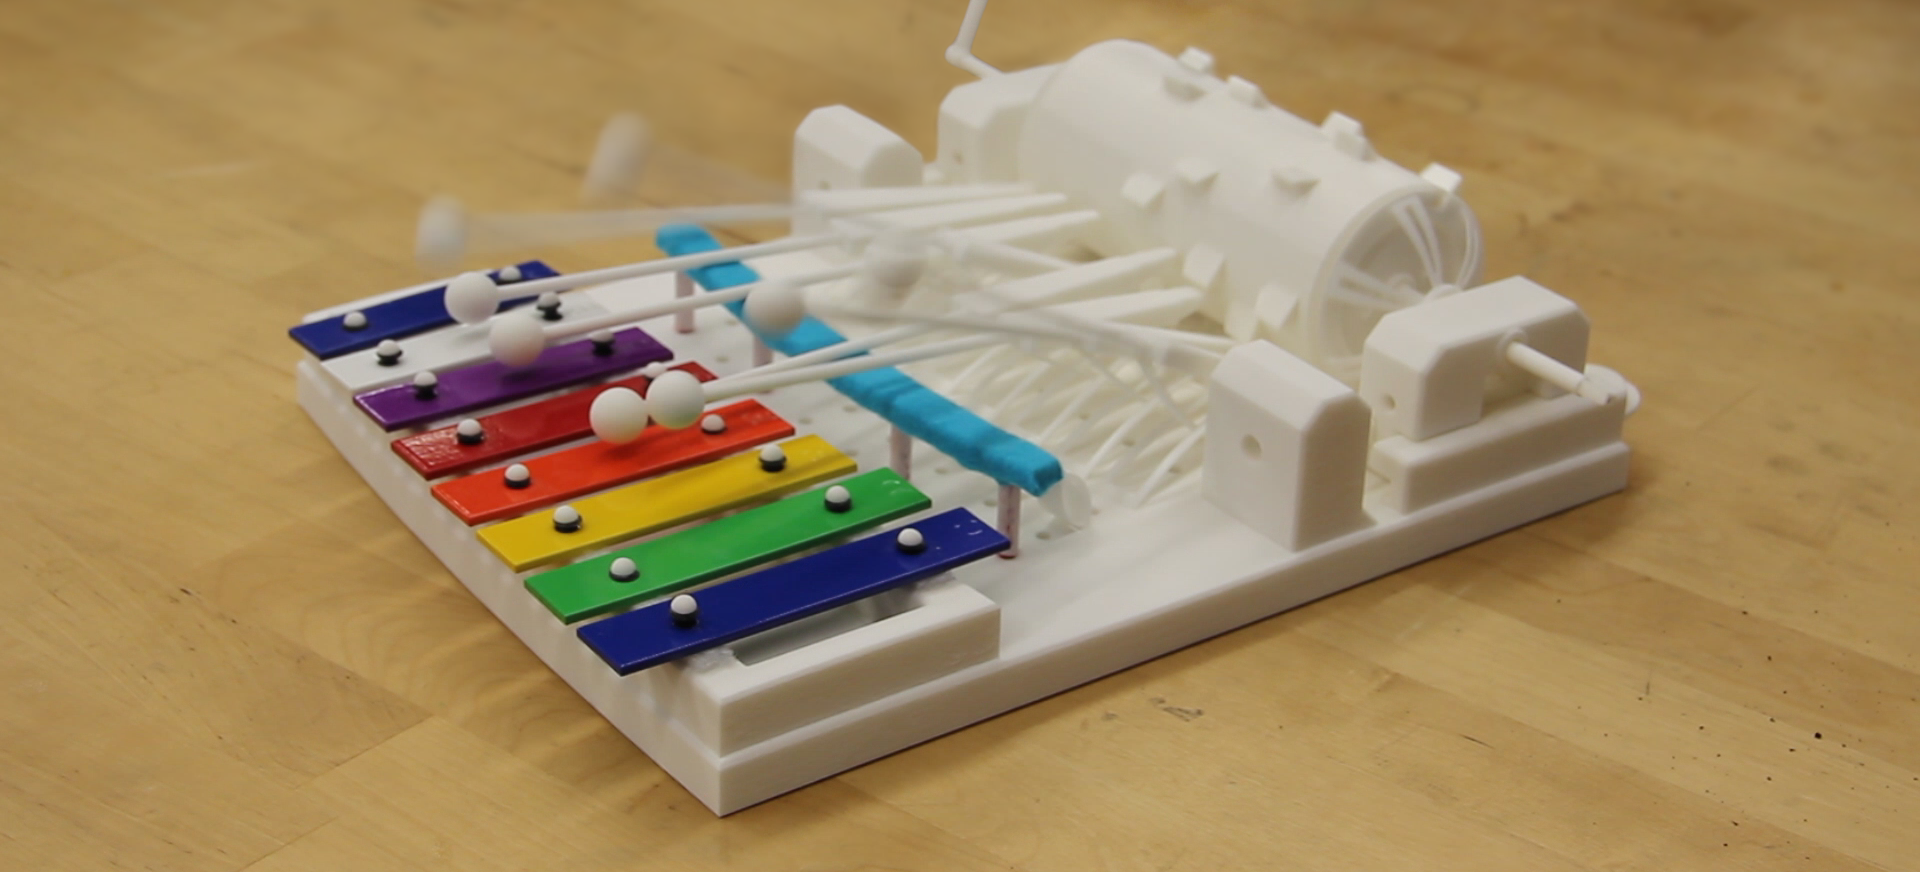 Additively Manufactured Music Box.